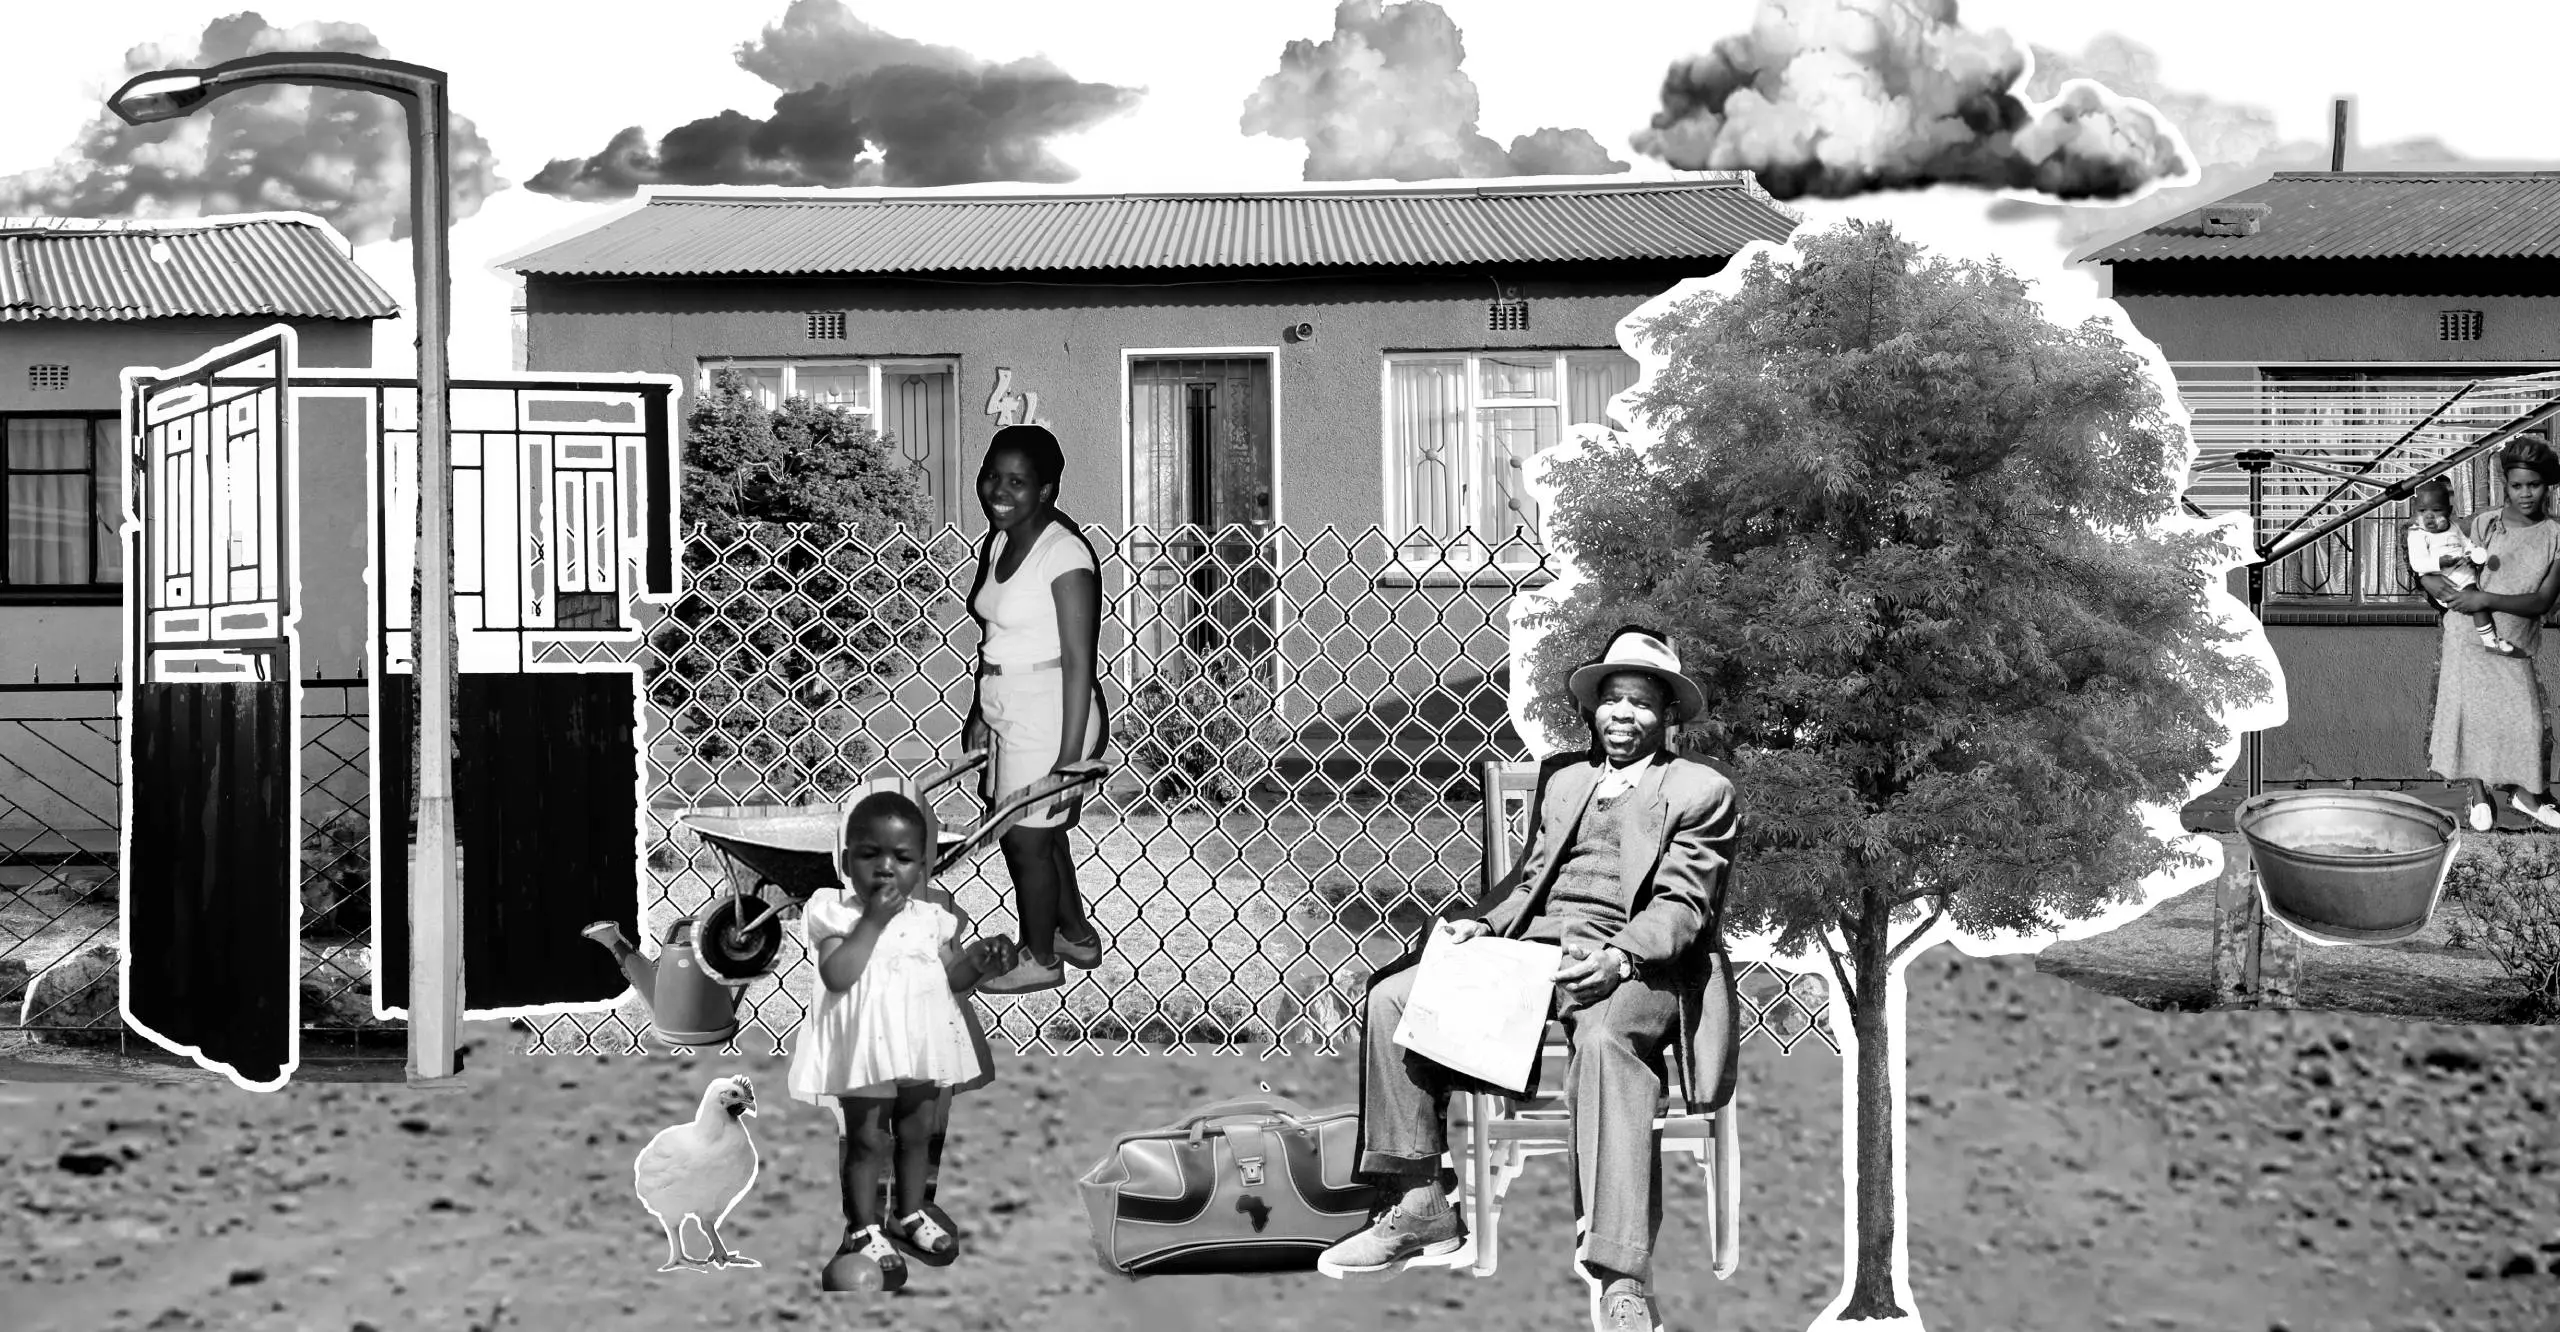 Black and white collage image of two  women, one of whom is carrying a baby, a man and a small  child, a tree, a streetlamp and a door in front of three houses